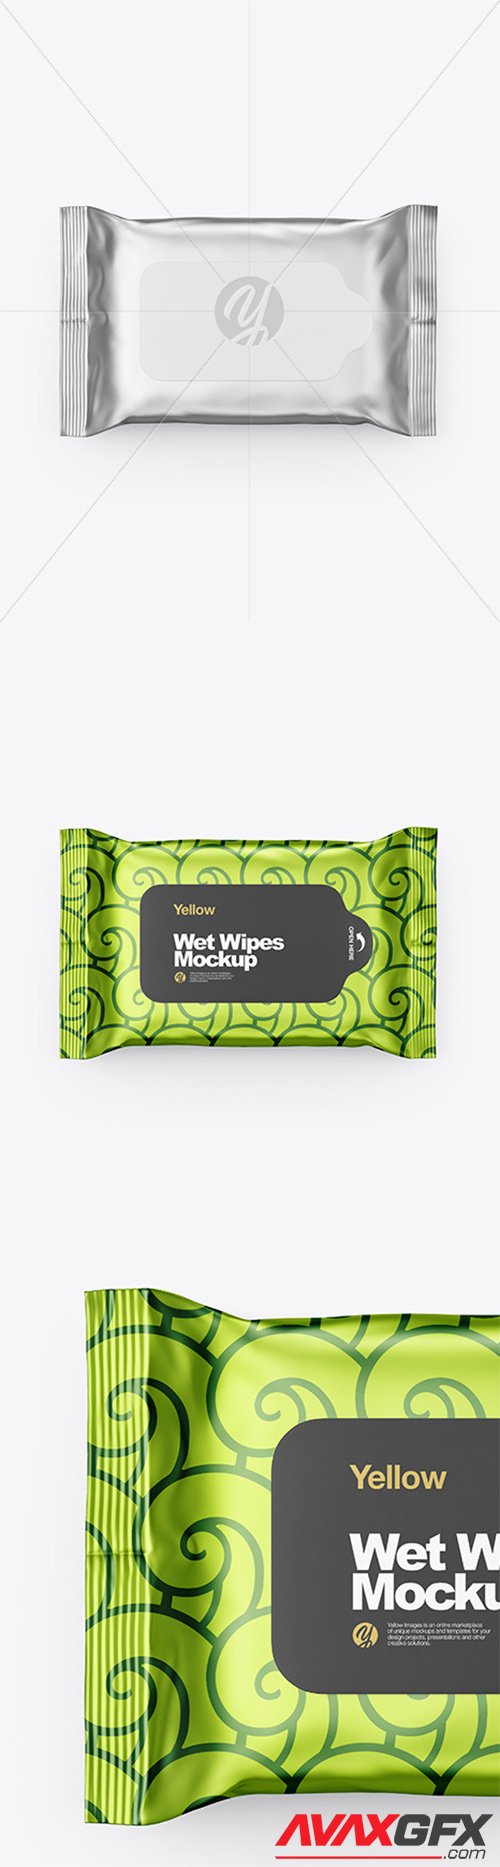 Download Metallic Wet Wipes Pack Mockup Top View 61616 Avaxgfx All Downloads That You Need In One Place Graphic From Nitroflare Rapidgator Yellowimages Mockups